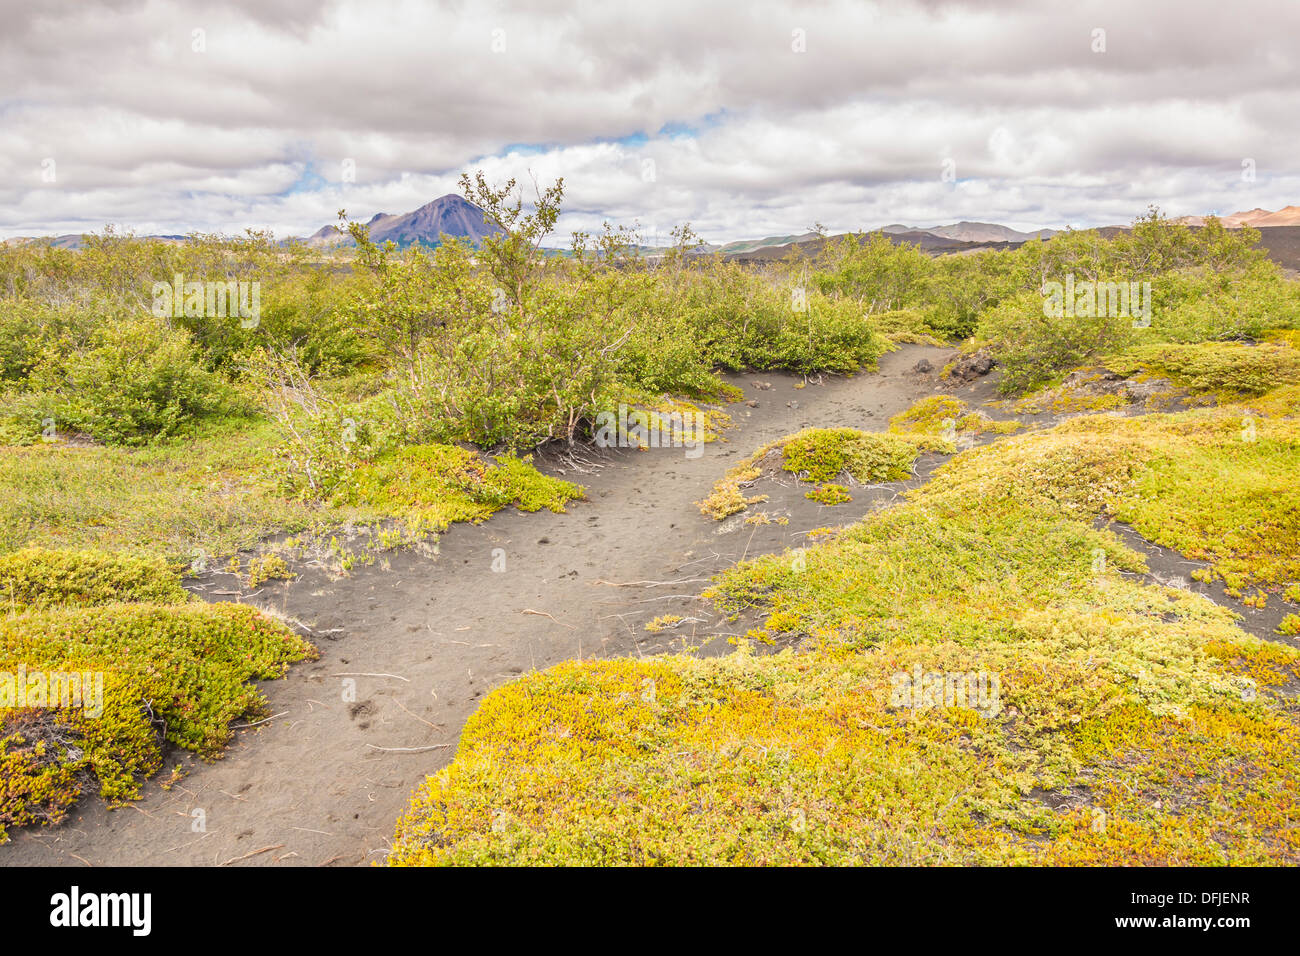 Green grass and trekking path in Myvatn area - Iceland. Stock Photo